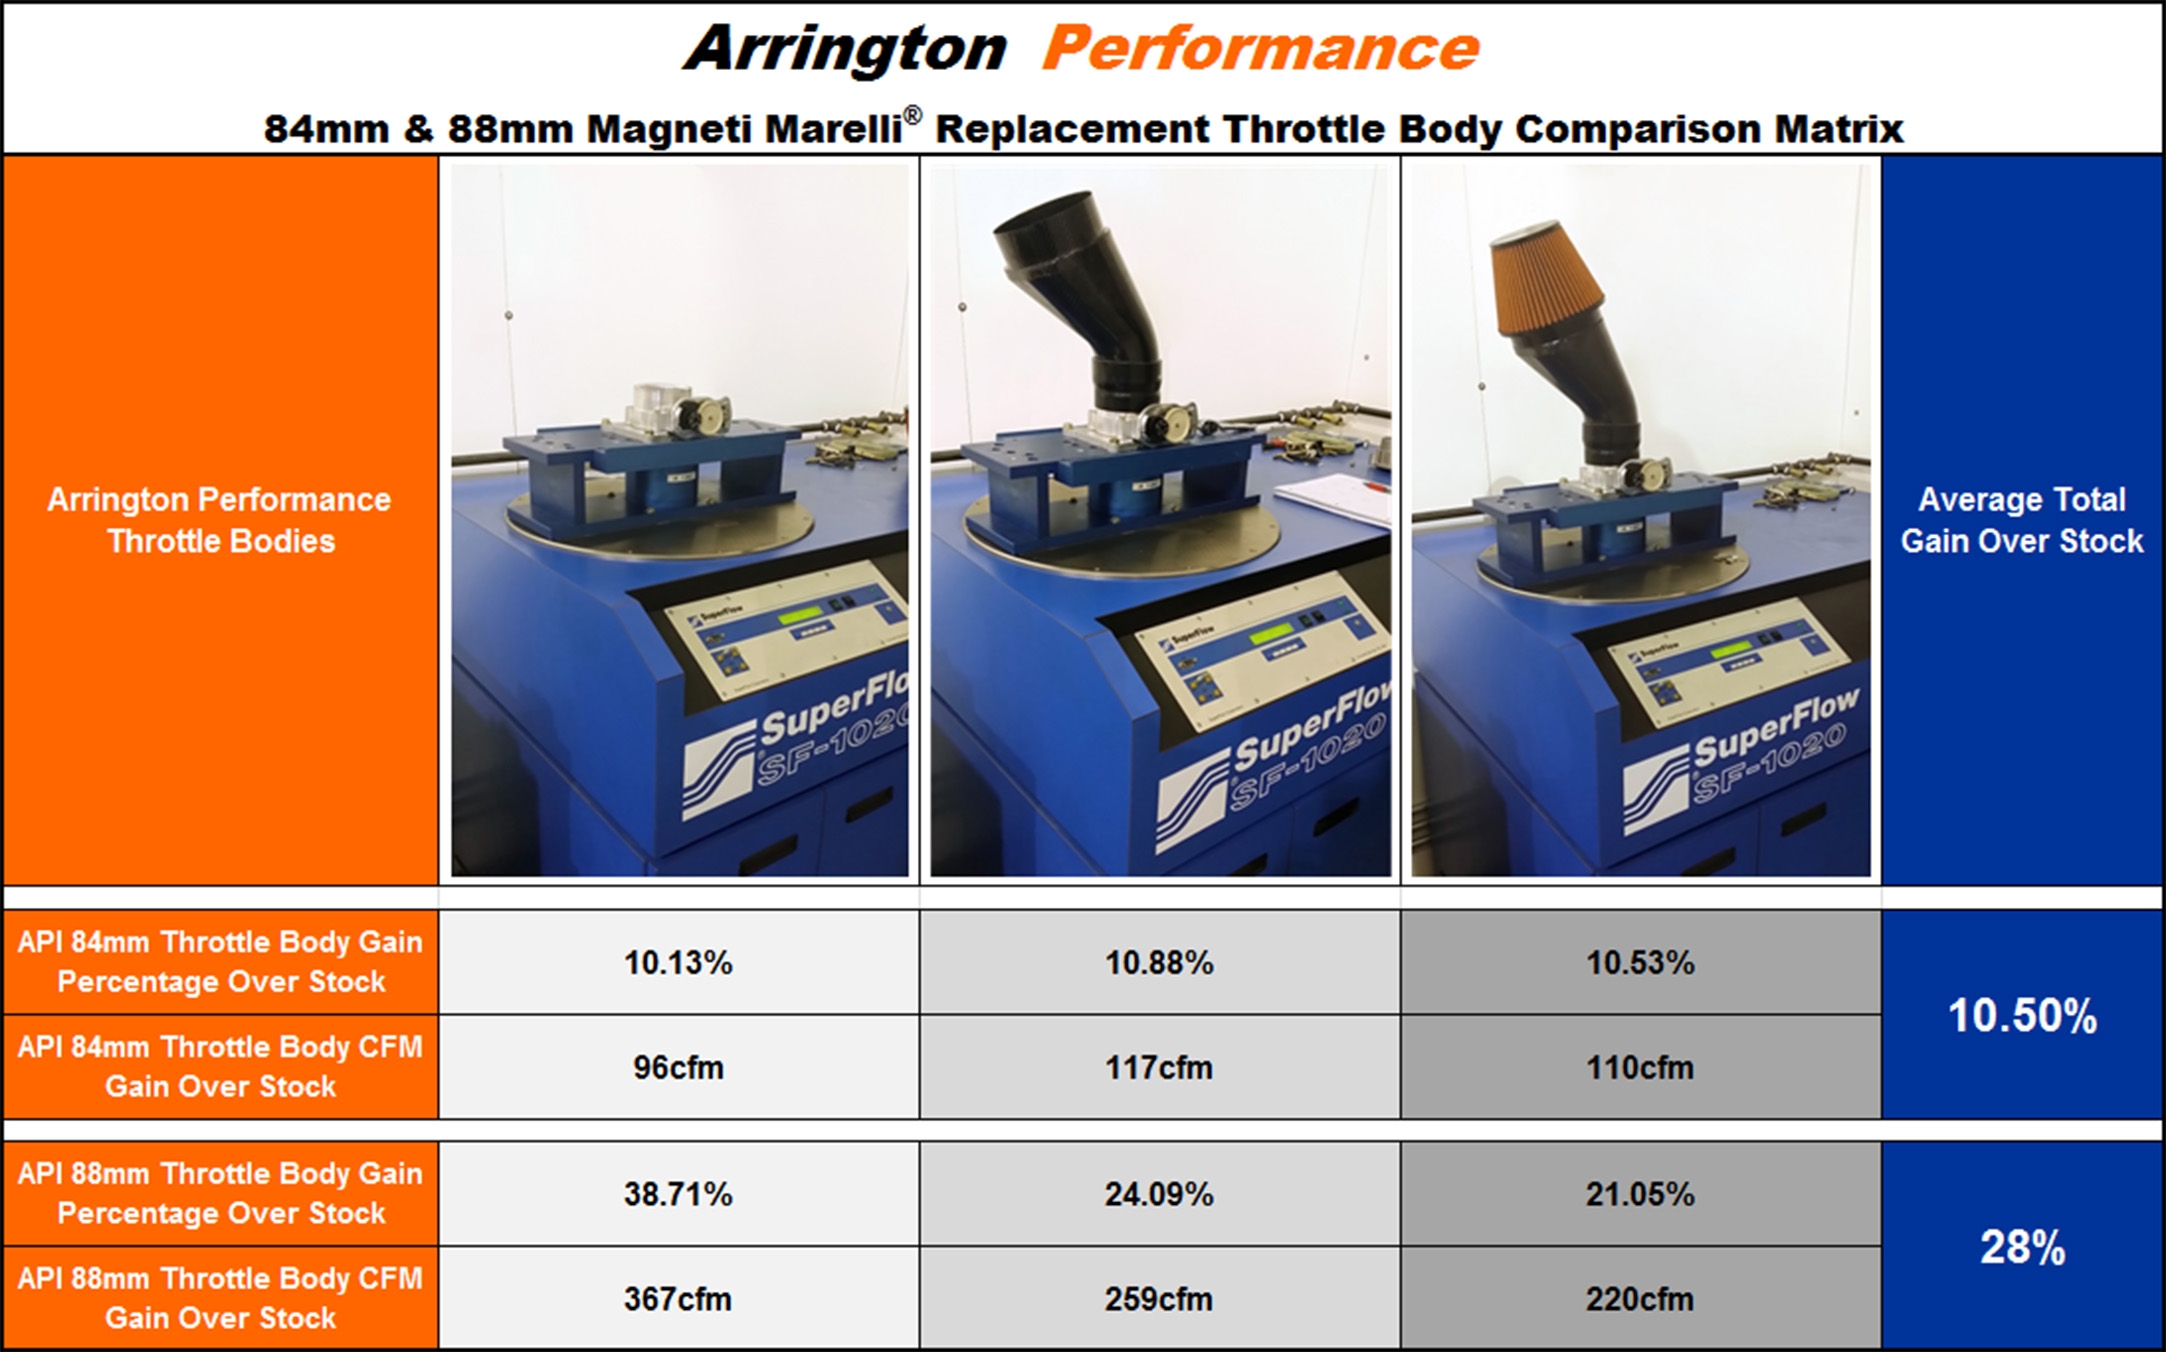 Arrington Performance 84mm and 88mm Flow Comparison to Stock 80mm Magnet Marelli